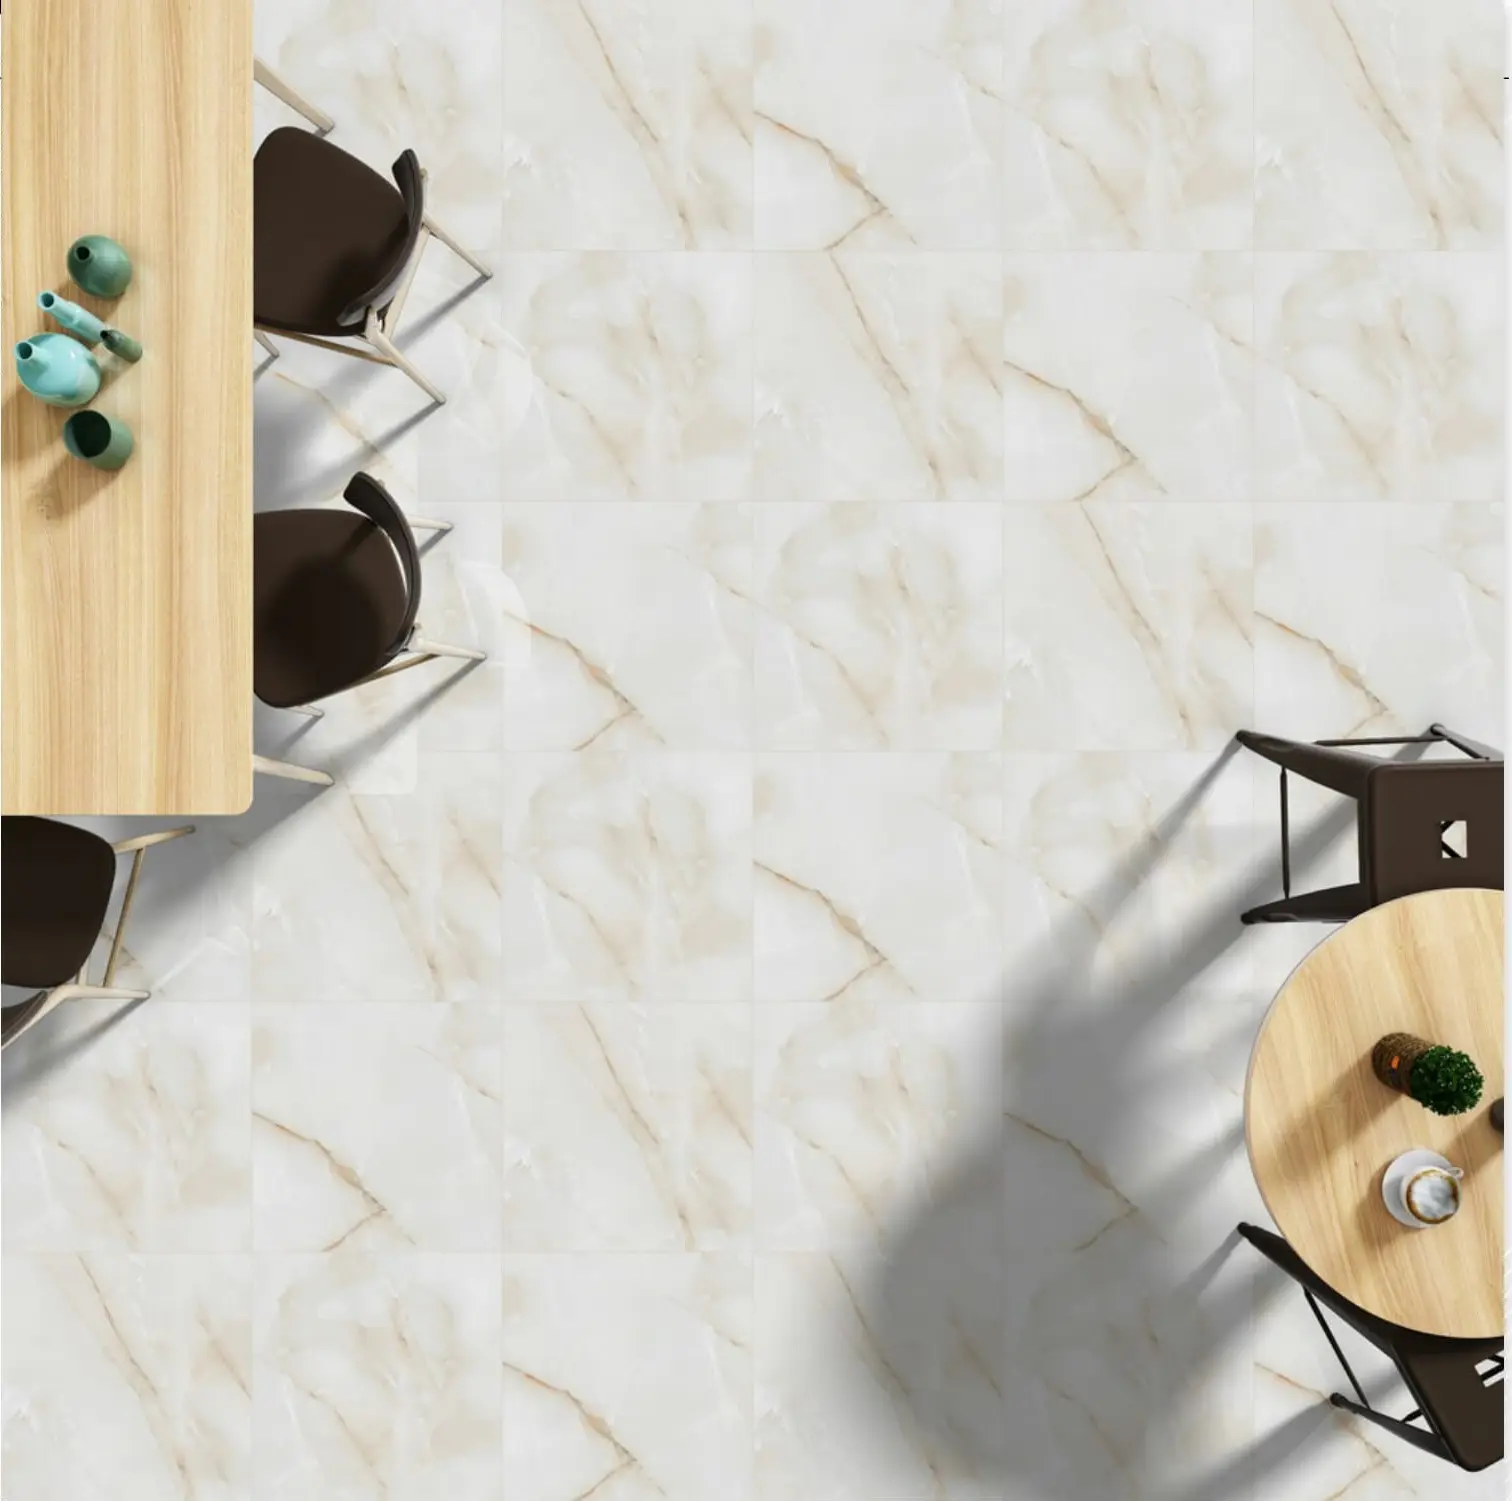 PORCELAIN POLISHED TILES FOR FLOOR AND WALL 600X600mm WITH DIFFERENT GLOSSY MATT CARVING BOOKMATCH 3D SURFACE